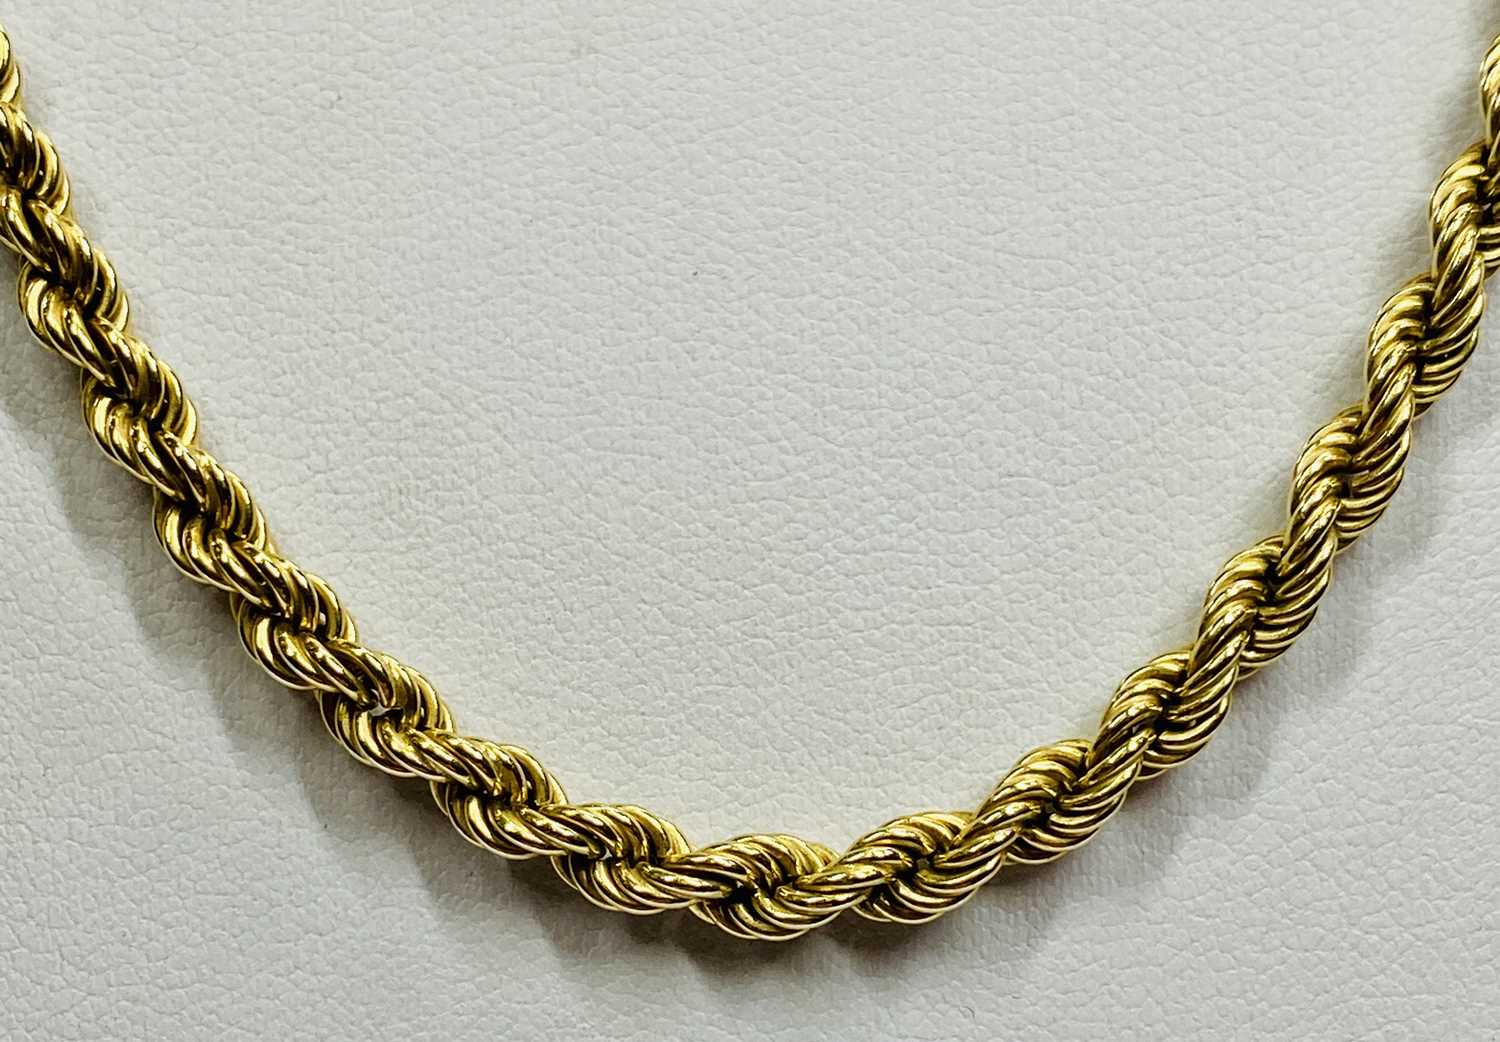 ITALIAN 9CT GOLD ROPE TWIST NECKLACE - with lobster clasp, Import Duty marks stamped '375', 51cms